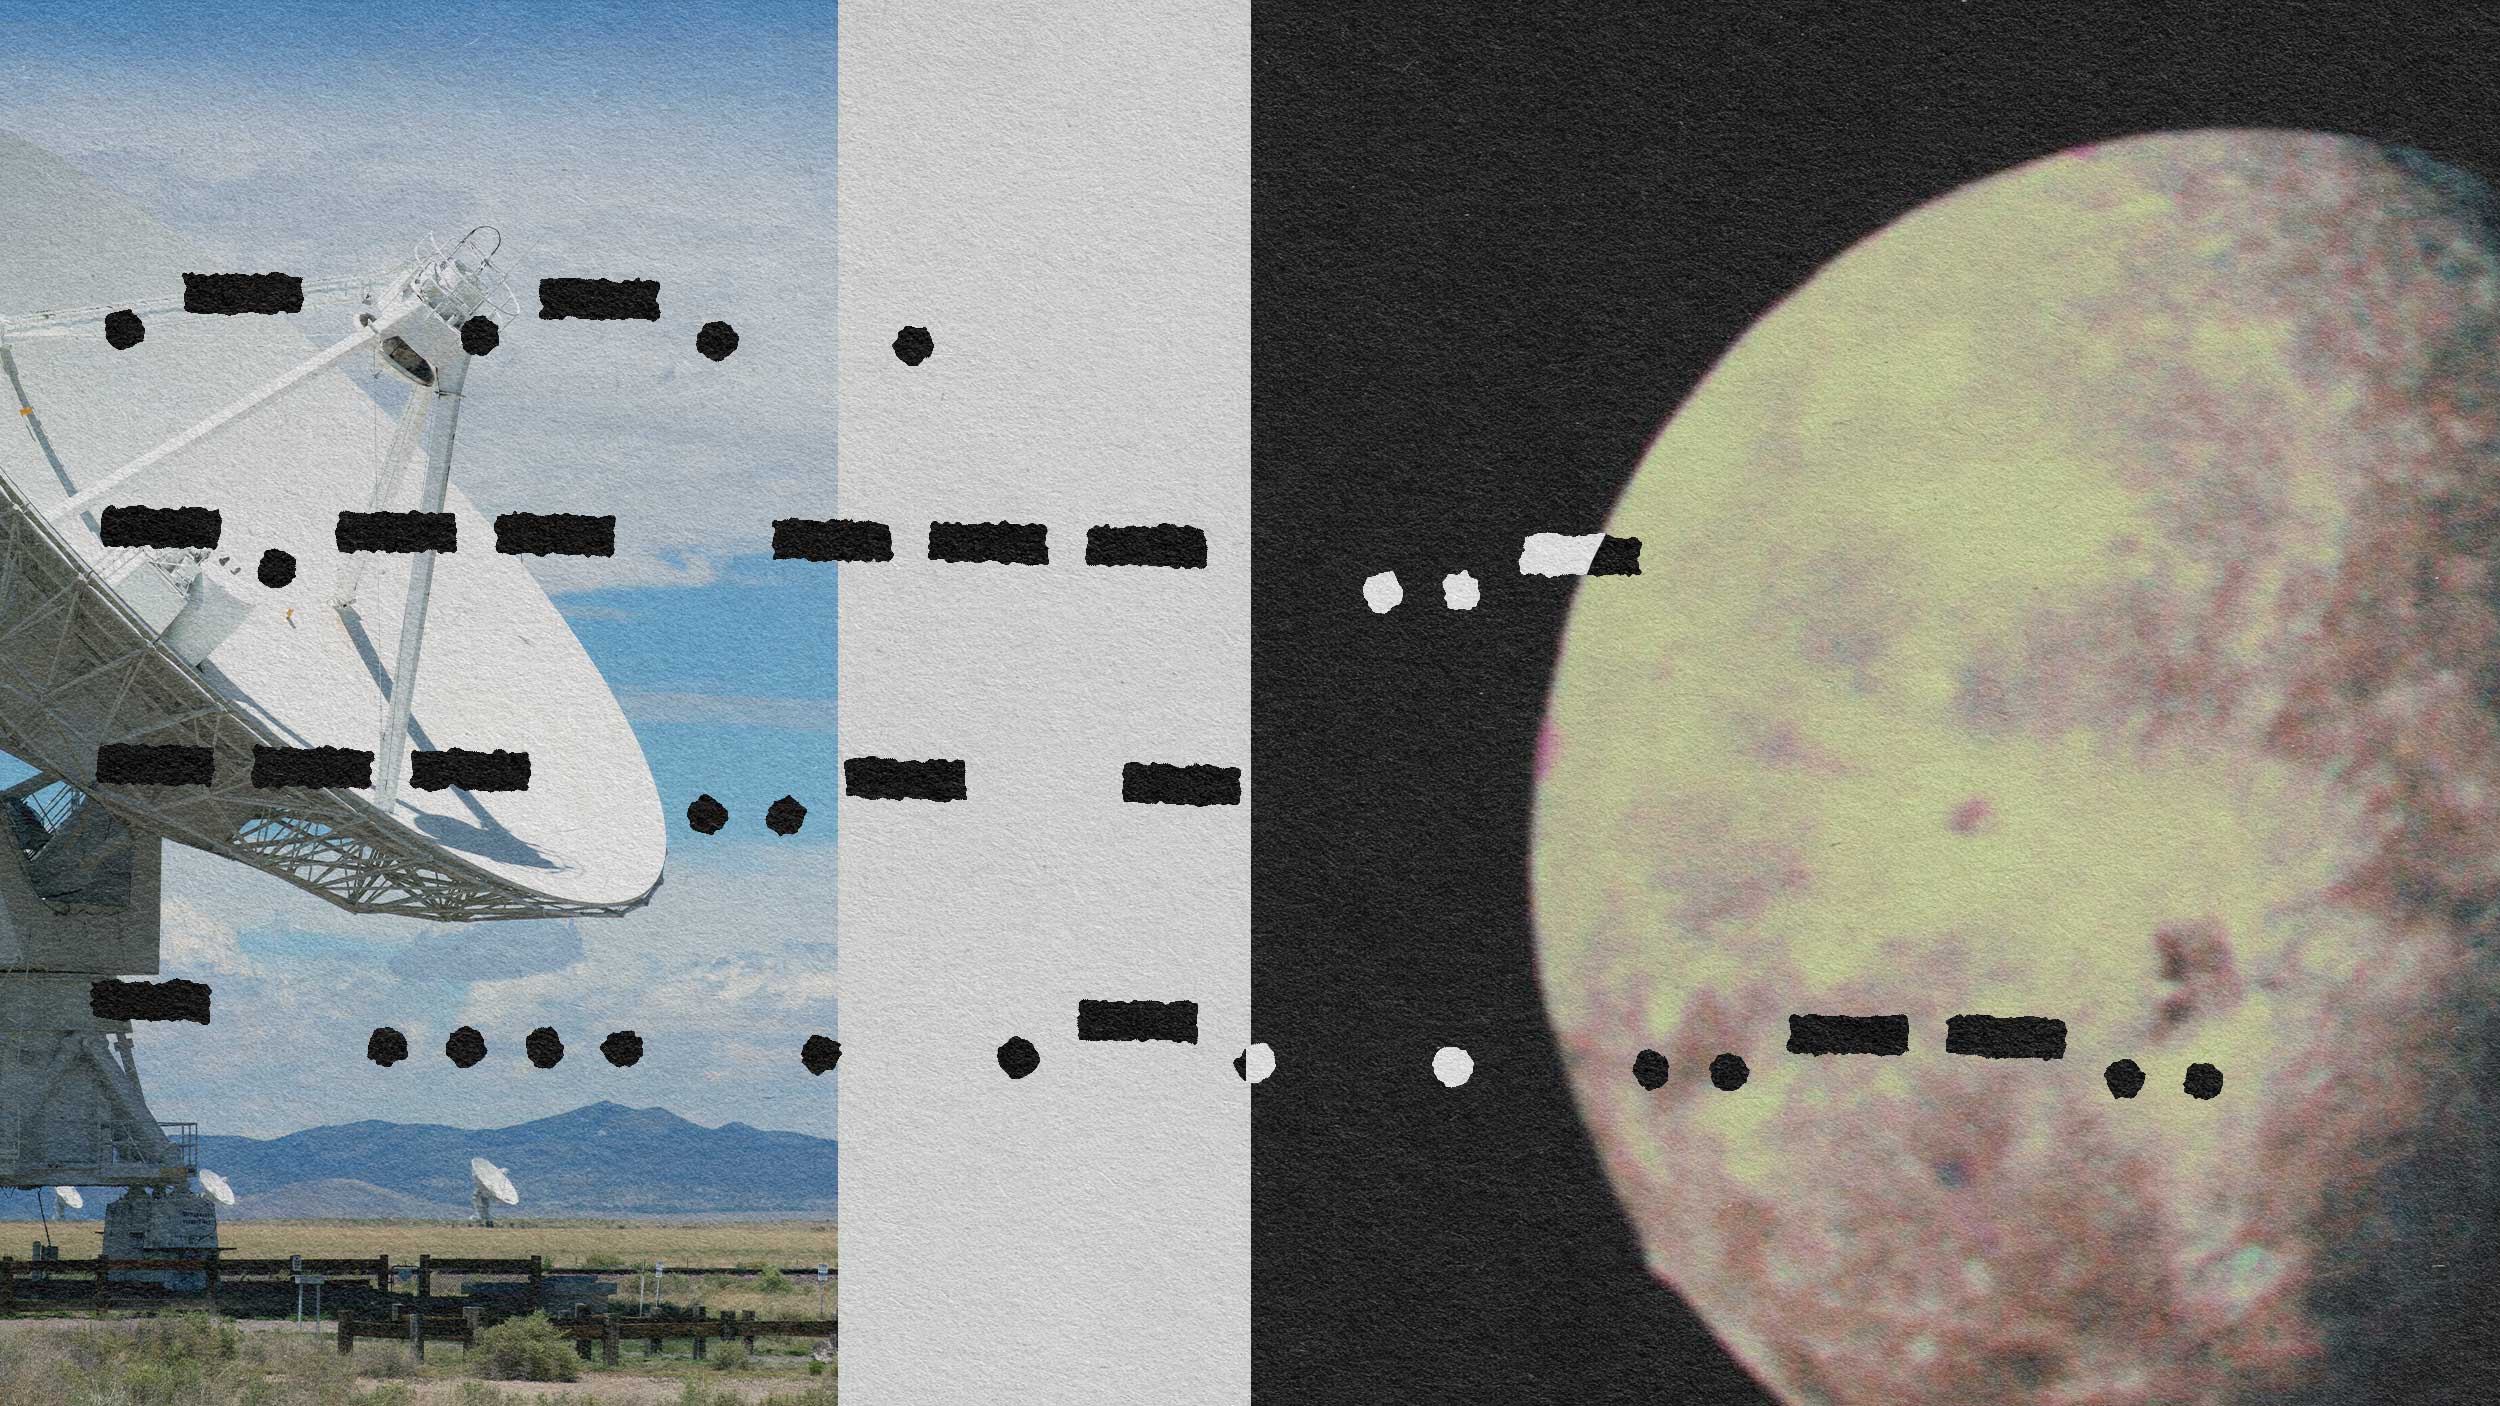 A collage depicting a radio telescope on the left and an abstract celestial body on the right, separated by a vertical band of black and white dashes.